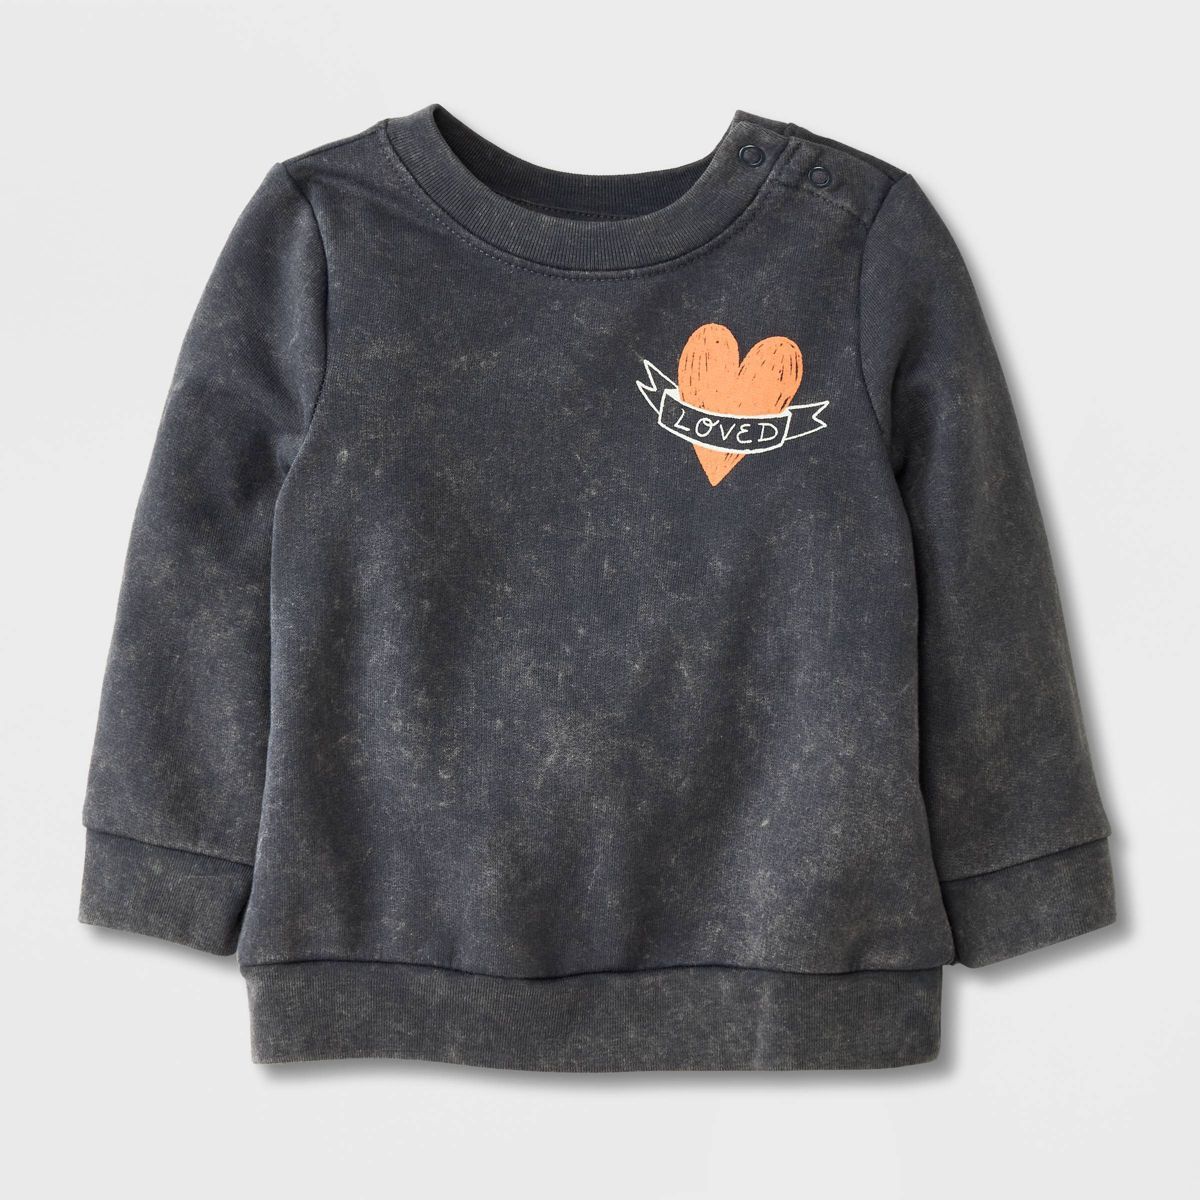 Baby 'Loved' French Terry Sweatshirt - Cat & Jack™ Gray | Target